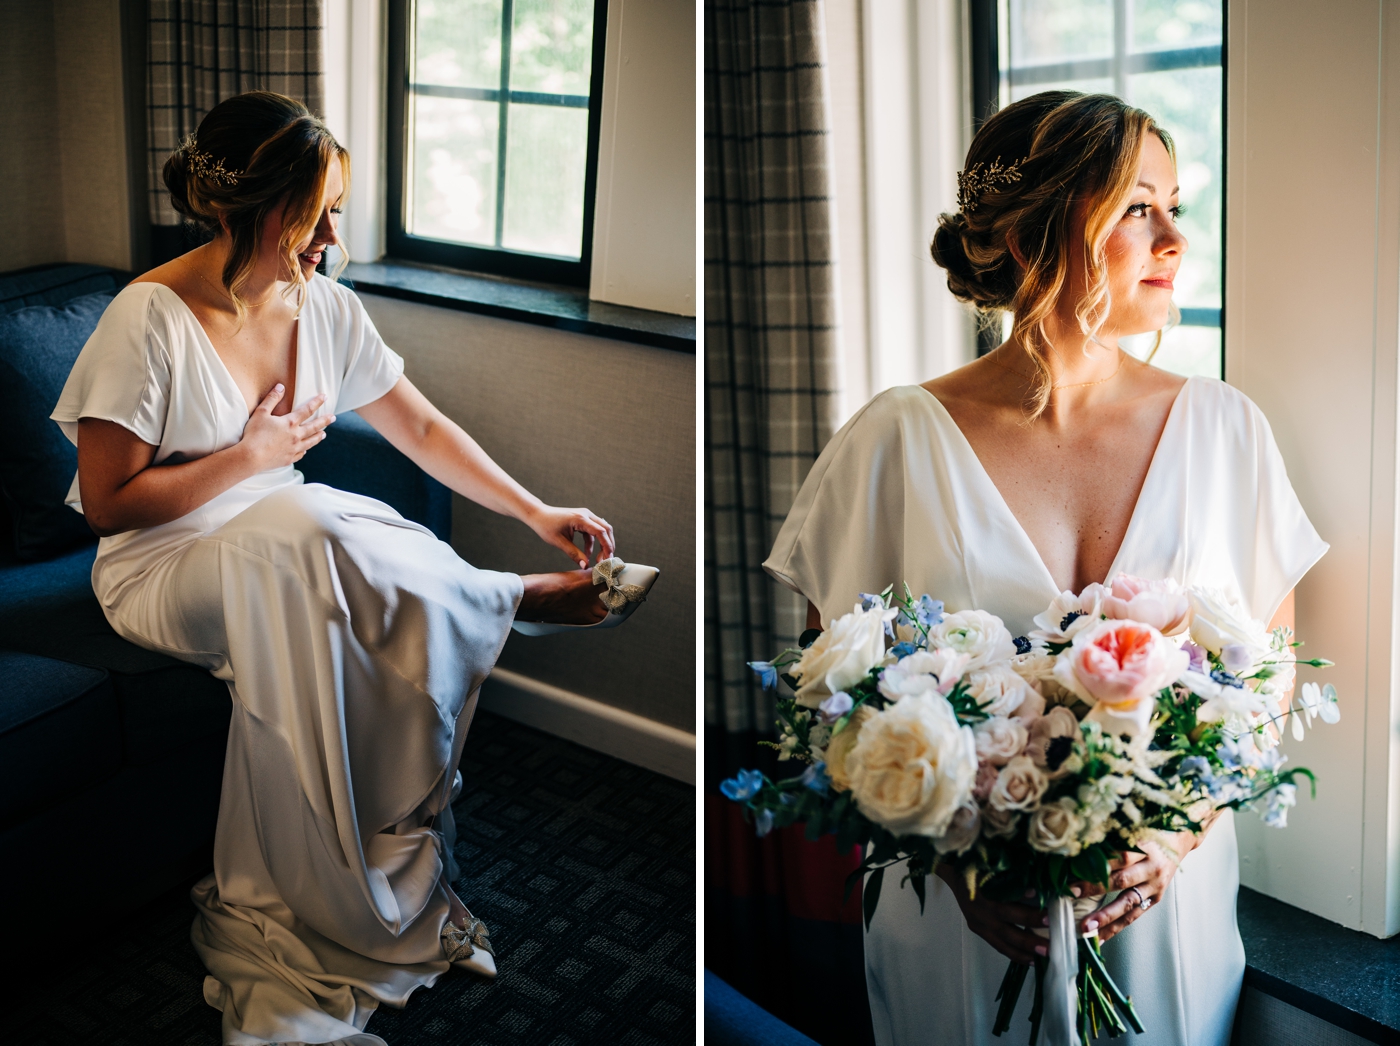 Bridal portraits by Mika LH Photography for Indiana wedding